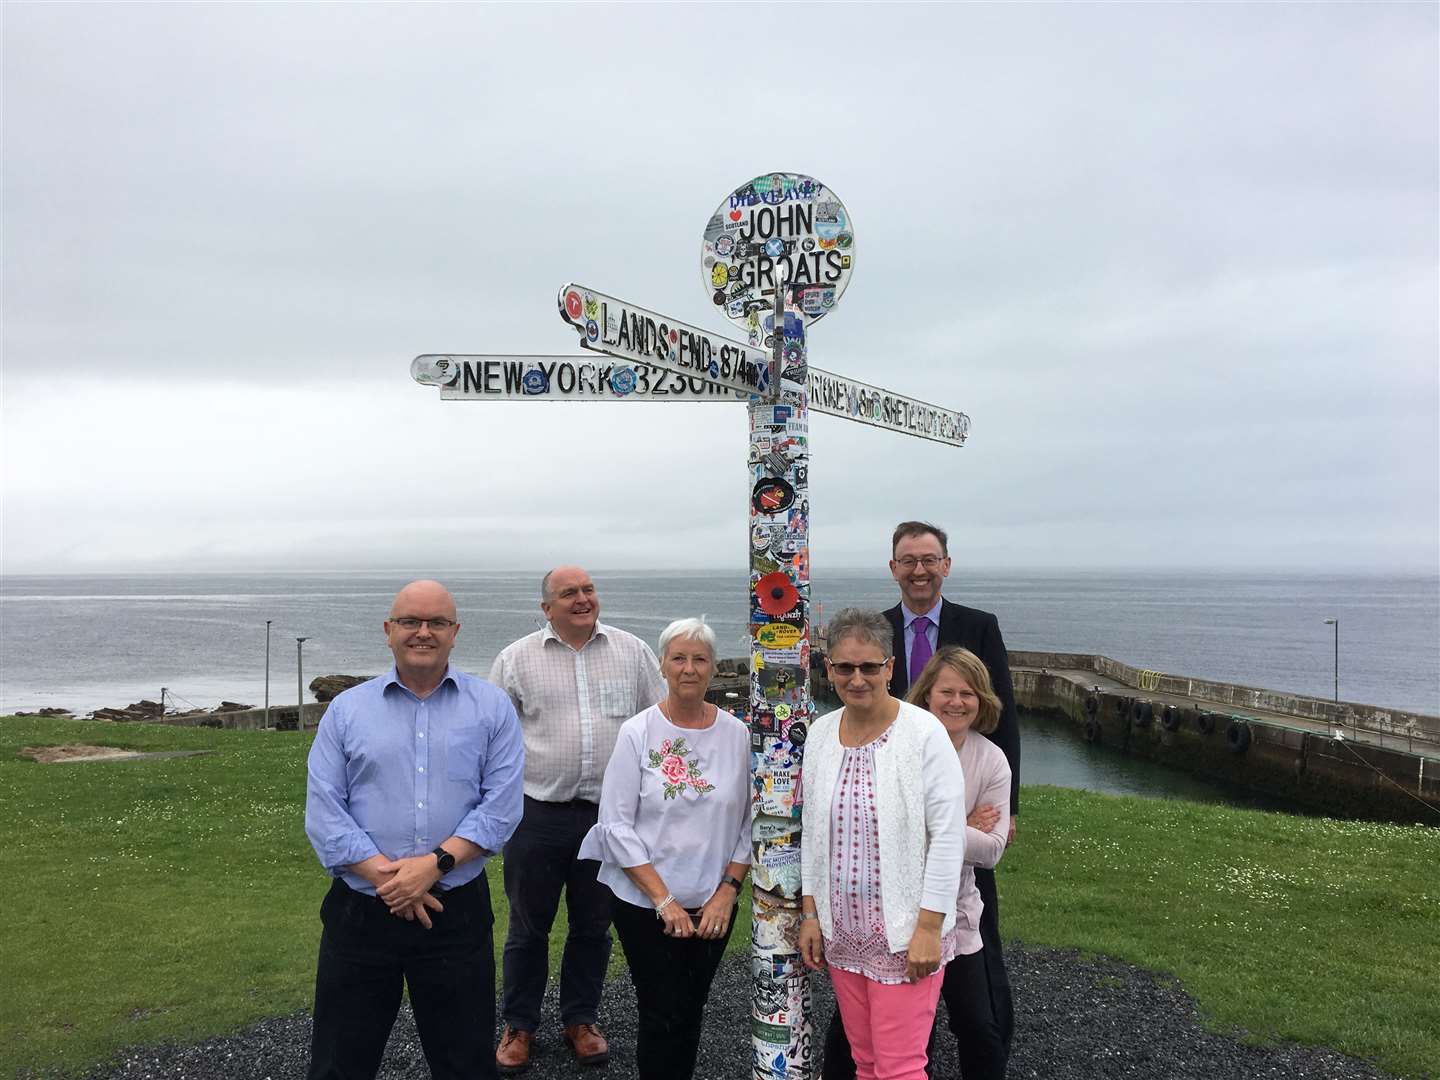 At the John O’Groats signpost during the tour of Caithness are (from left) Stuart Hamilton, business development specialist, Scottish Chambers of Commerce; Frazer Coupland, chief executive, Lochaber Chamber of Commerce; Val Russell, chief executive, Ayrshire Chamber of Commerce, and chair of the chief executives forum; Trudy Morris, chief executive, Caithness Chamber of Commerce; Fiona Levack, business development manager, Caithness Chamber of Commerce; and Stewart Nicol, chief executive, Inverness Chamber of Commerce.